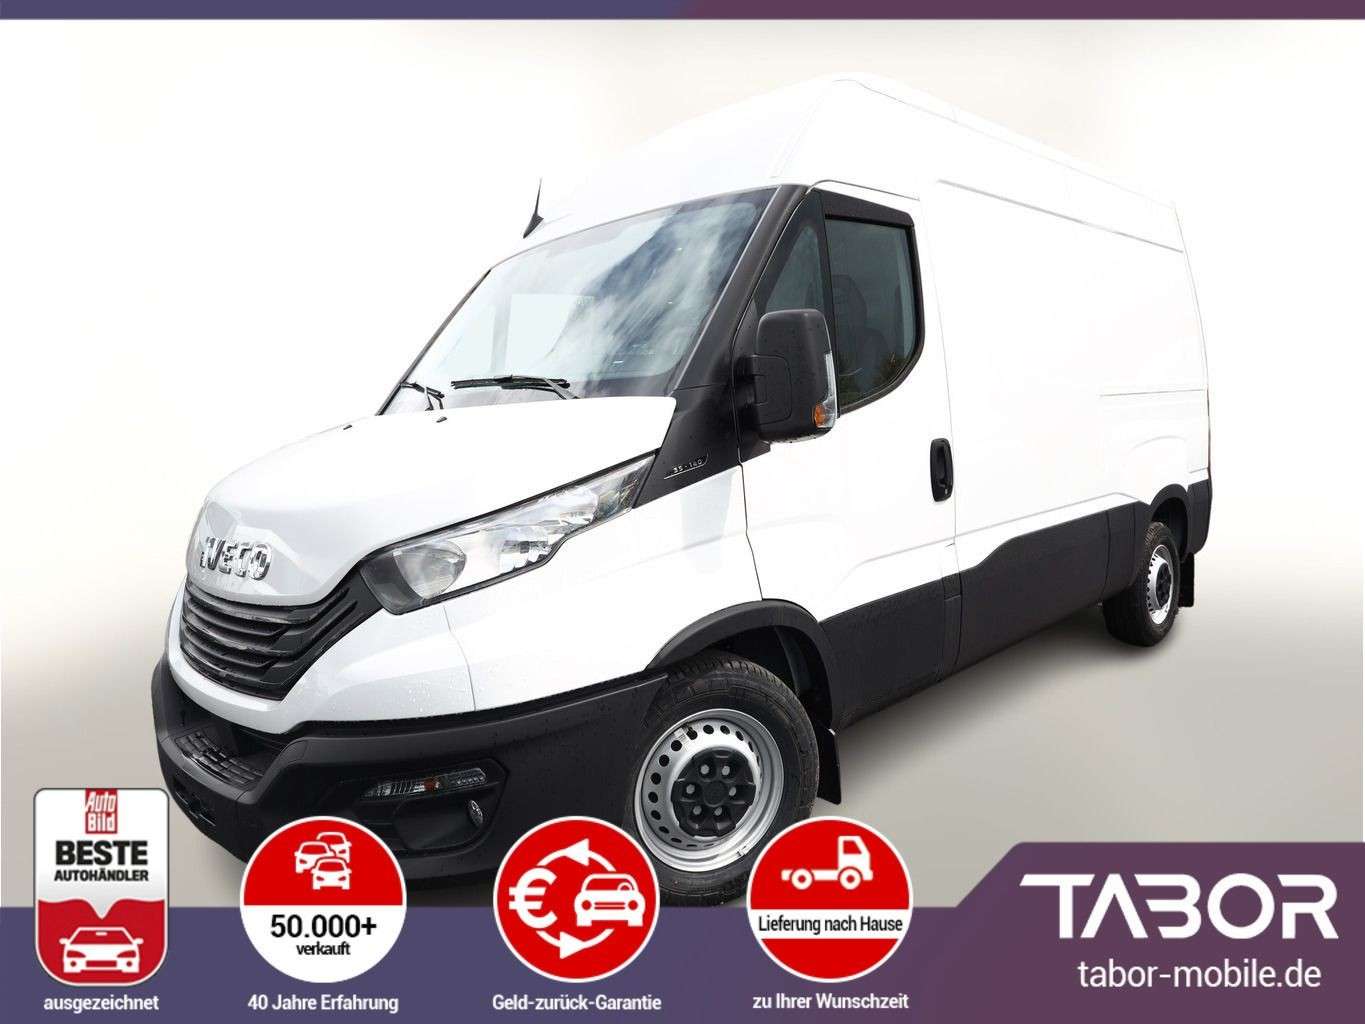 Iveco Daily Van in White new in Berlin for € 35,188.-